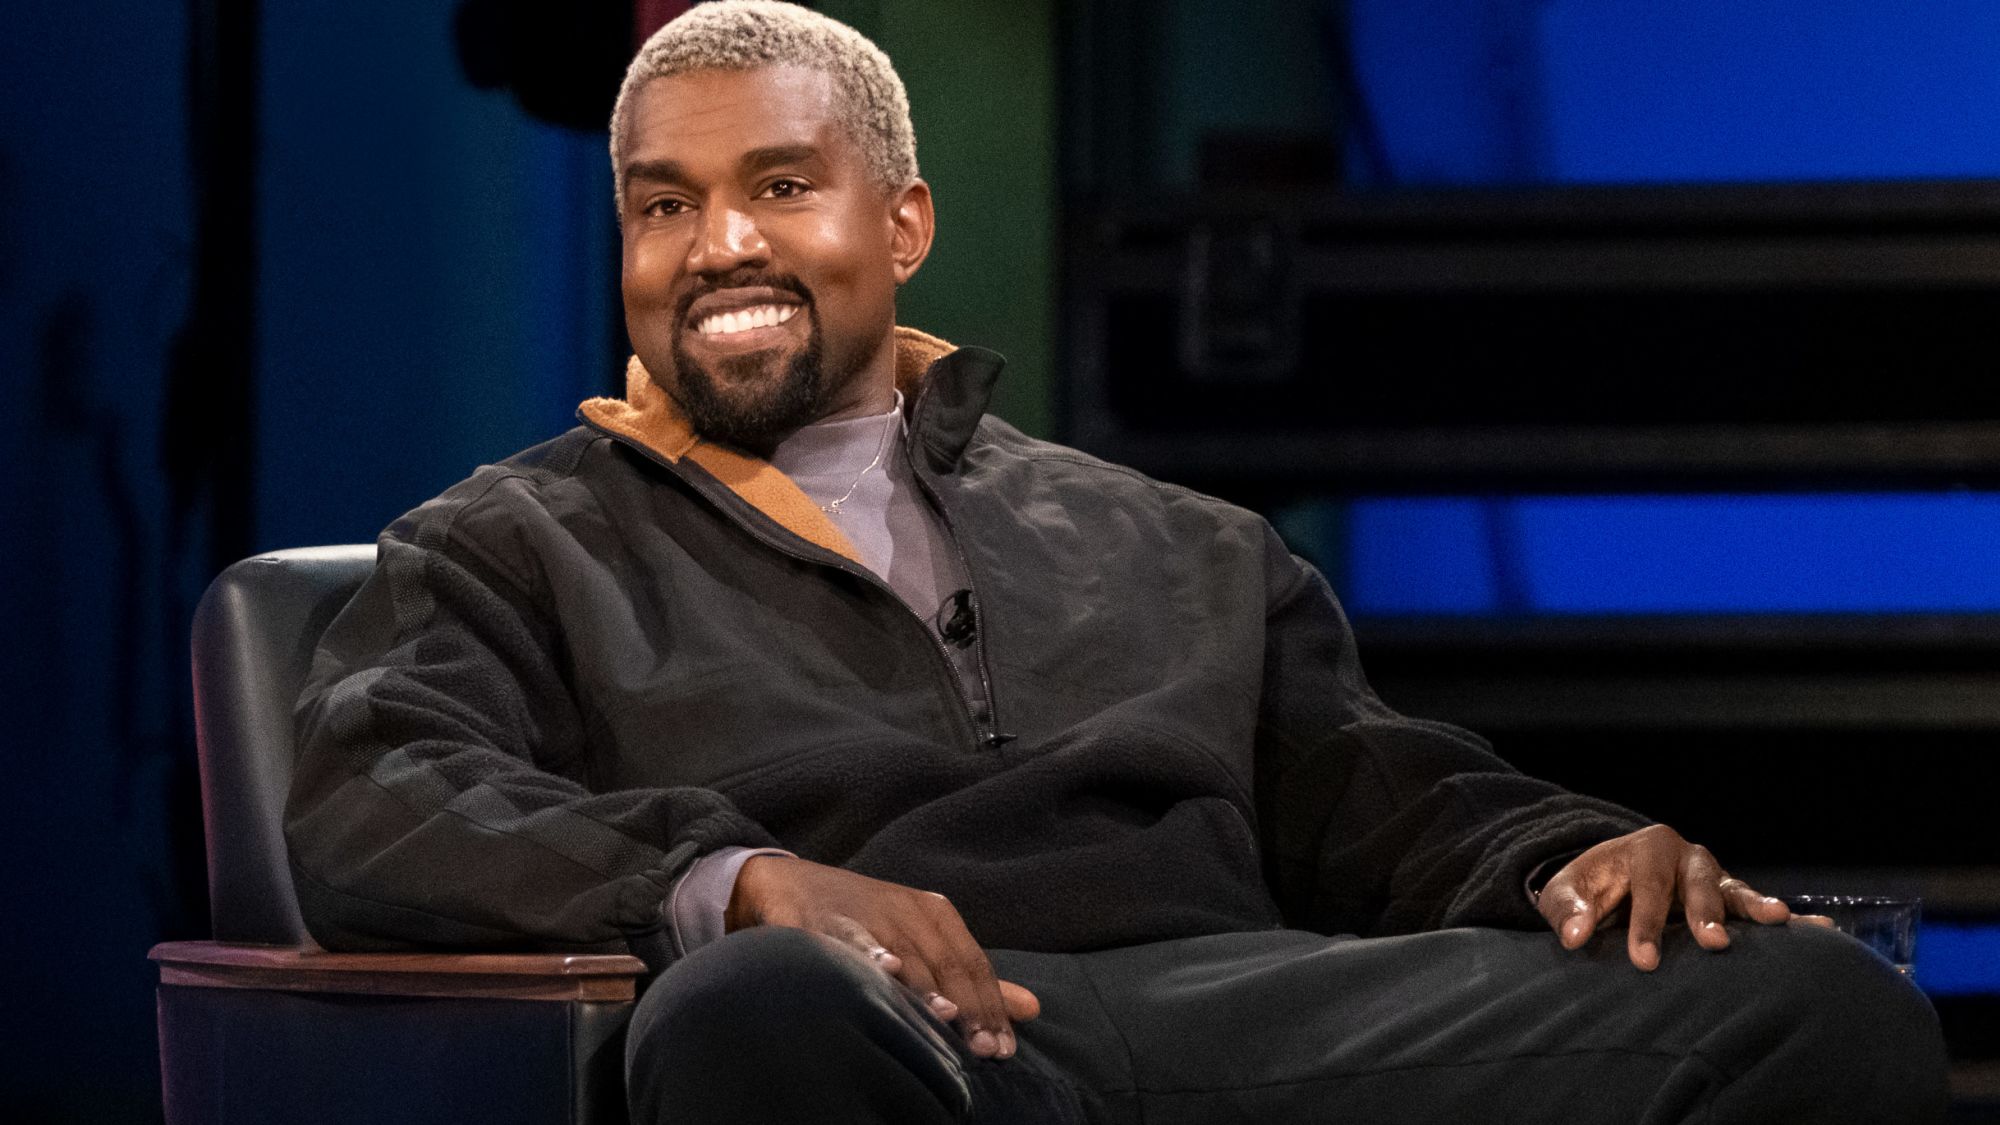 Kanye West Soars with "The Vultures," New Album Featuring R&B Star TY Dolla $ign